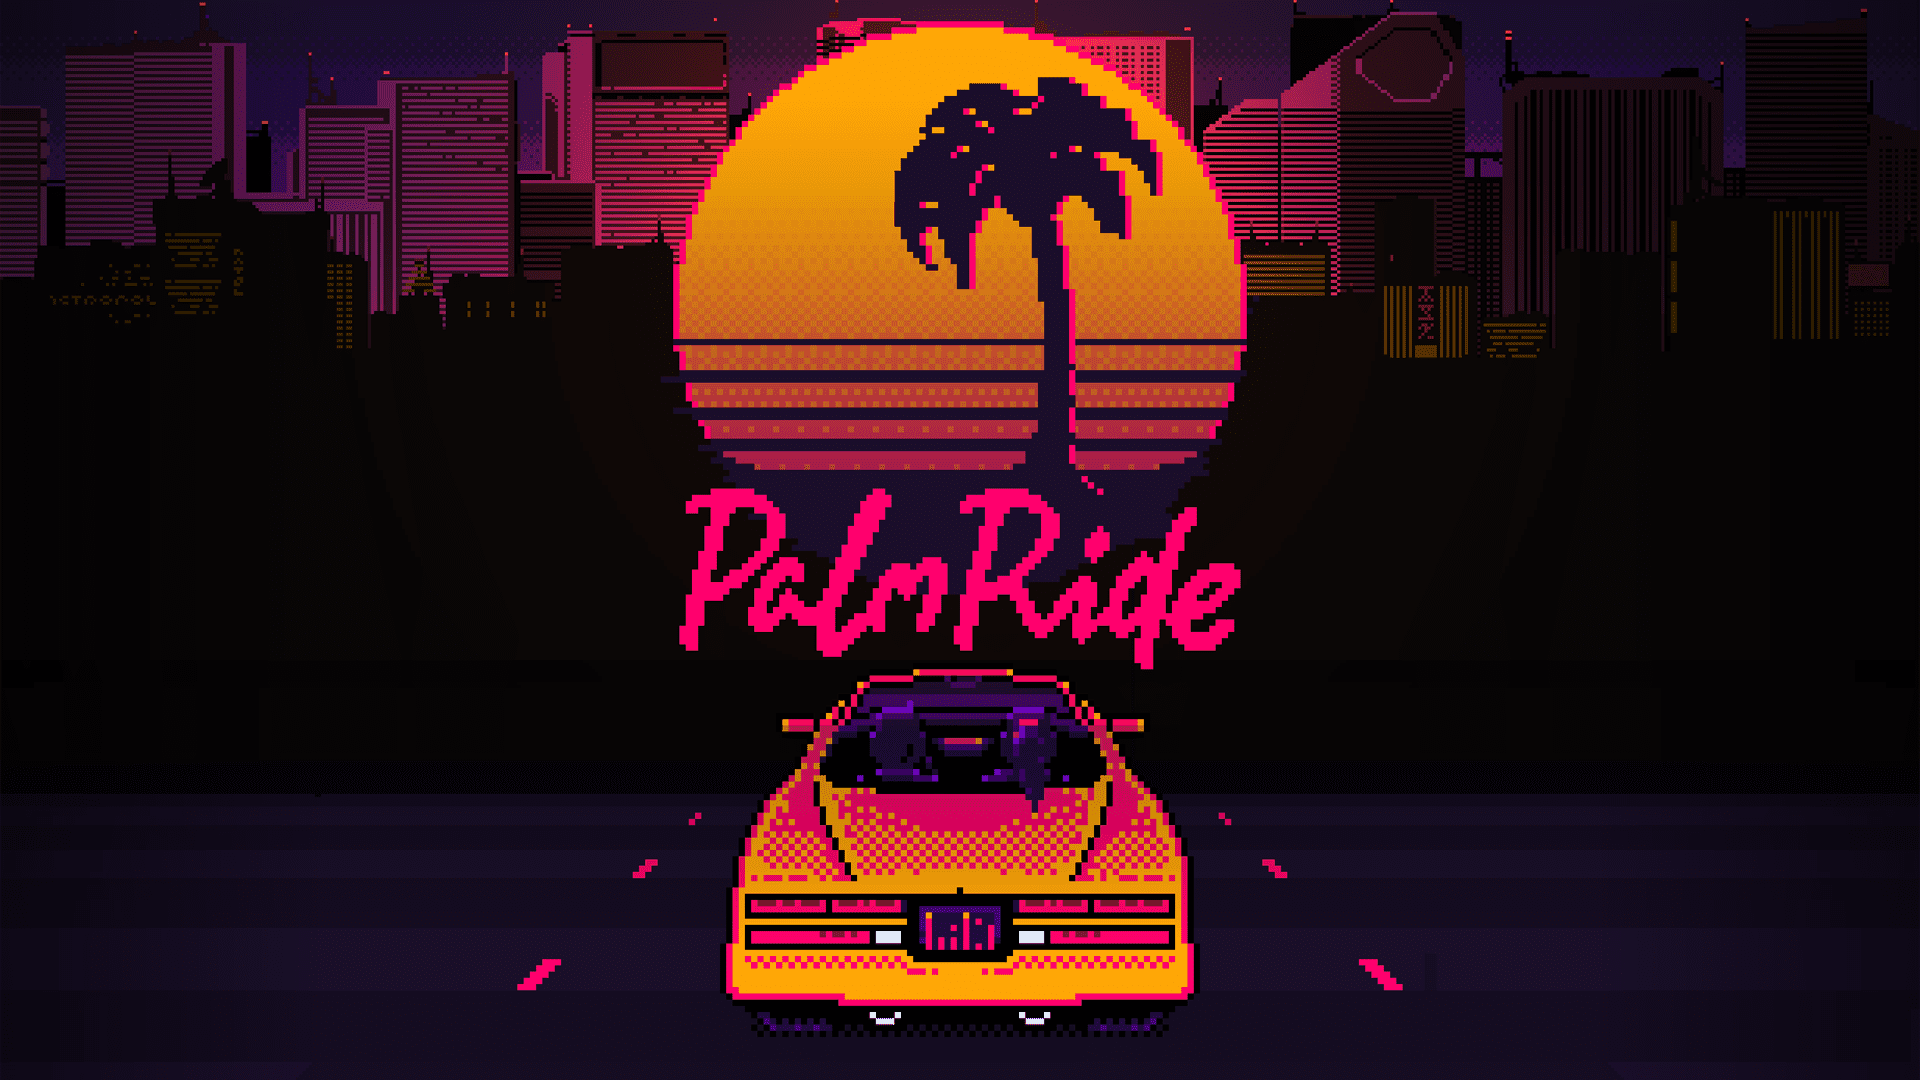 "Retro-futuristic" driving game 'PalmRide' now available on Steam